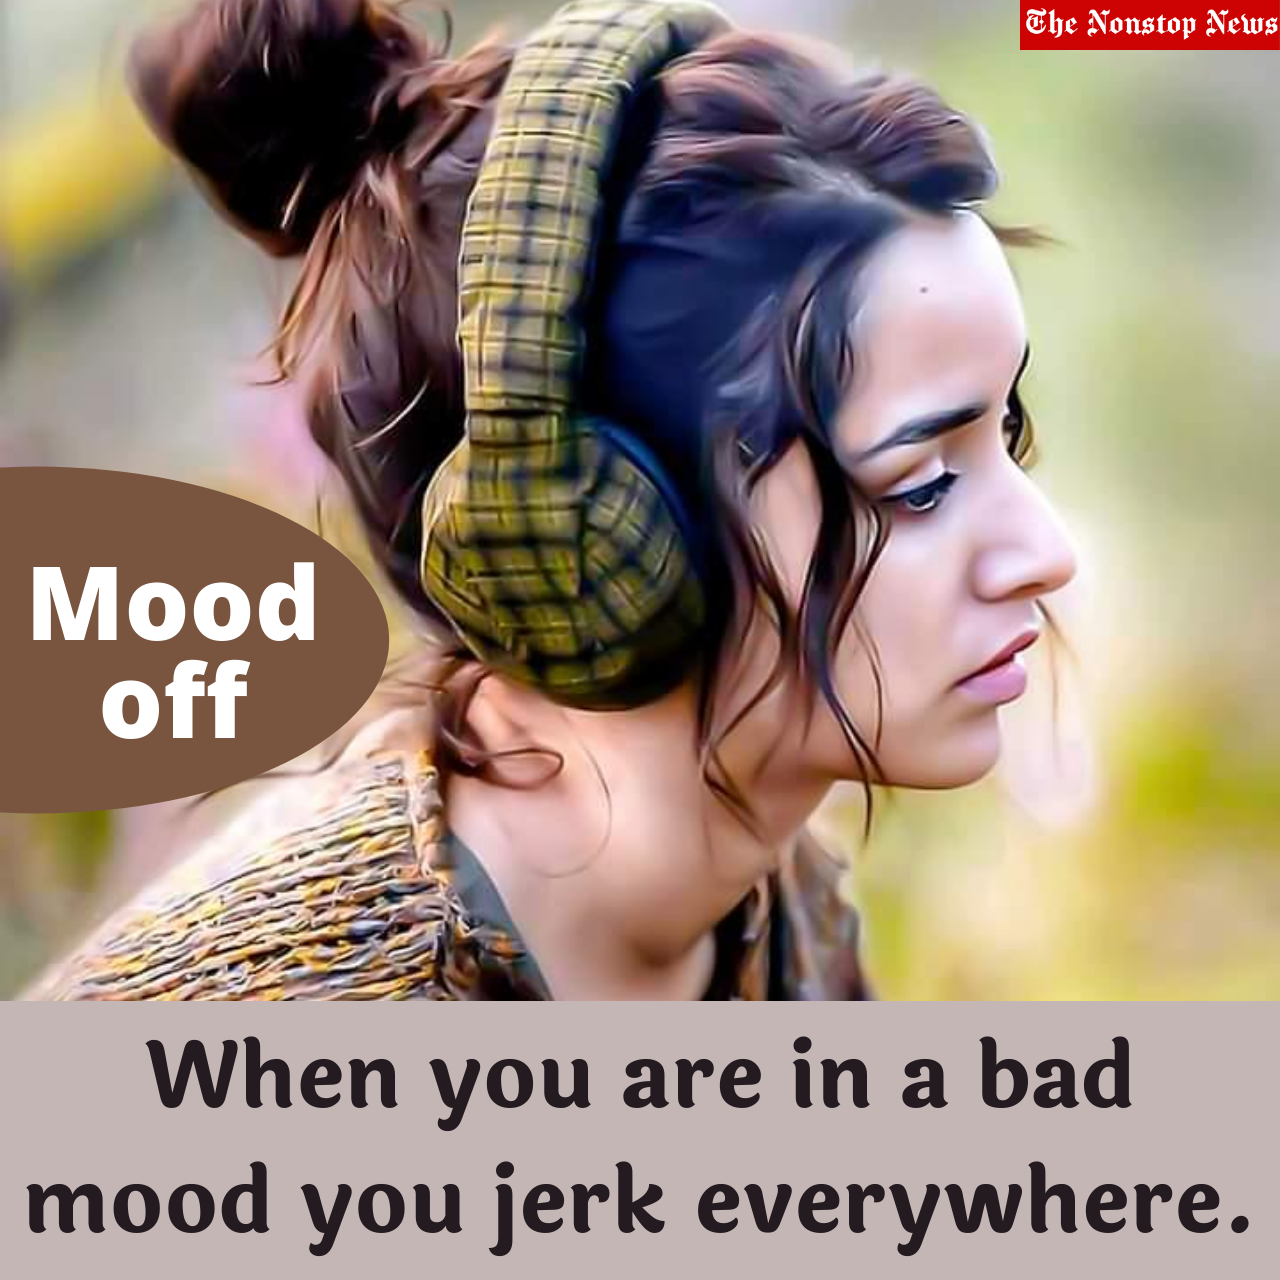 150+ Best Mood Off Shayari, Status, DP, Images, and WhatsApp Status for Girls and Boys